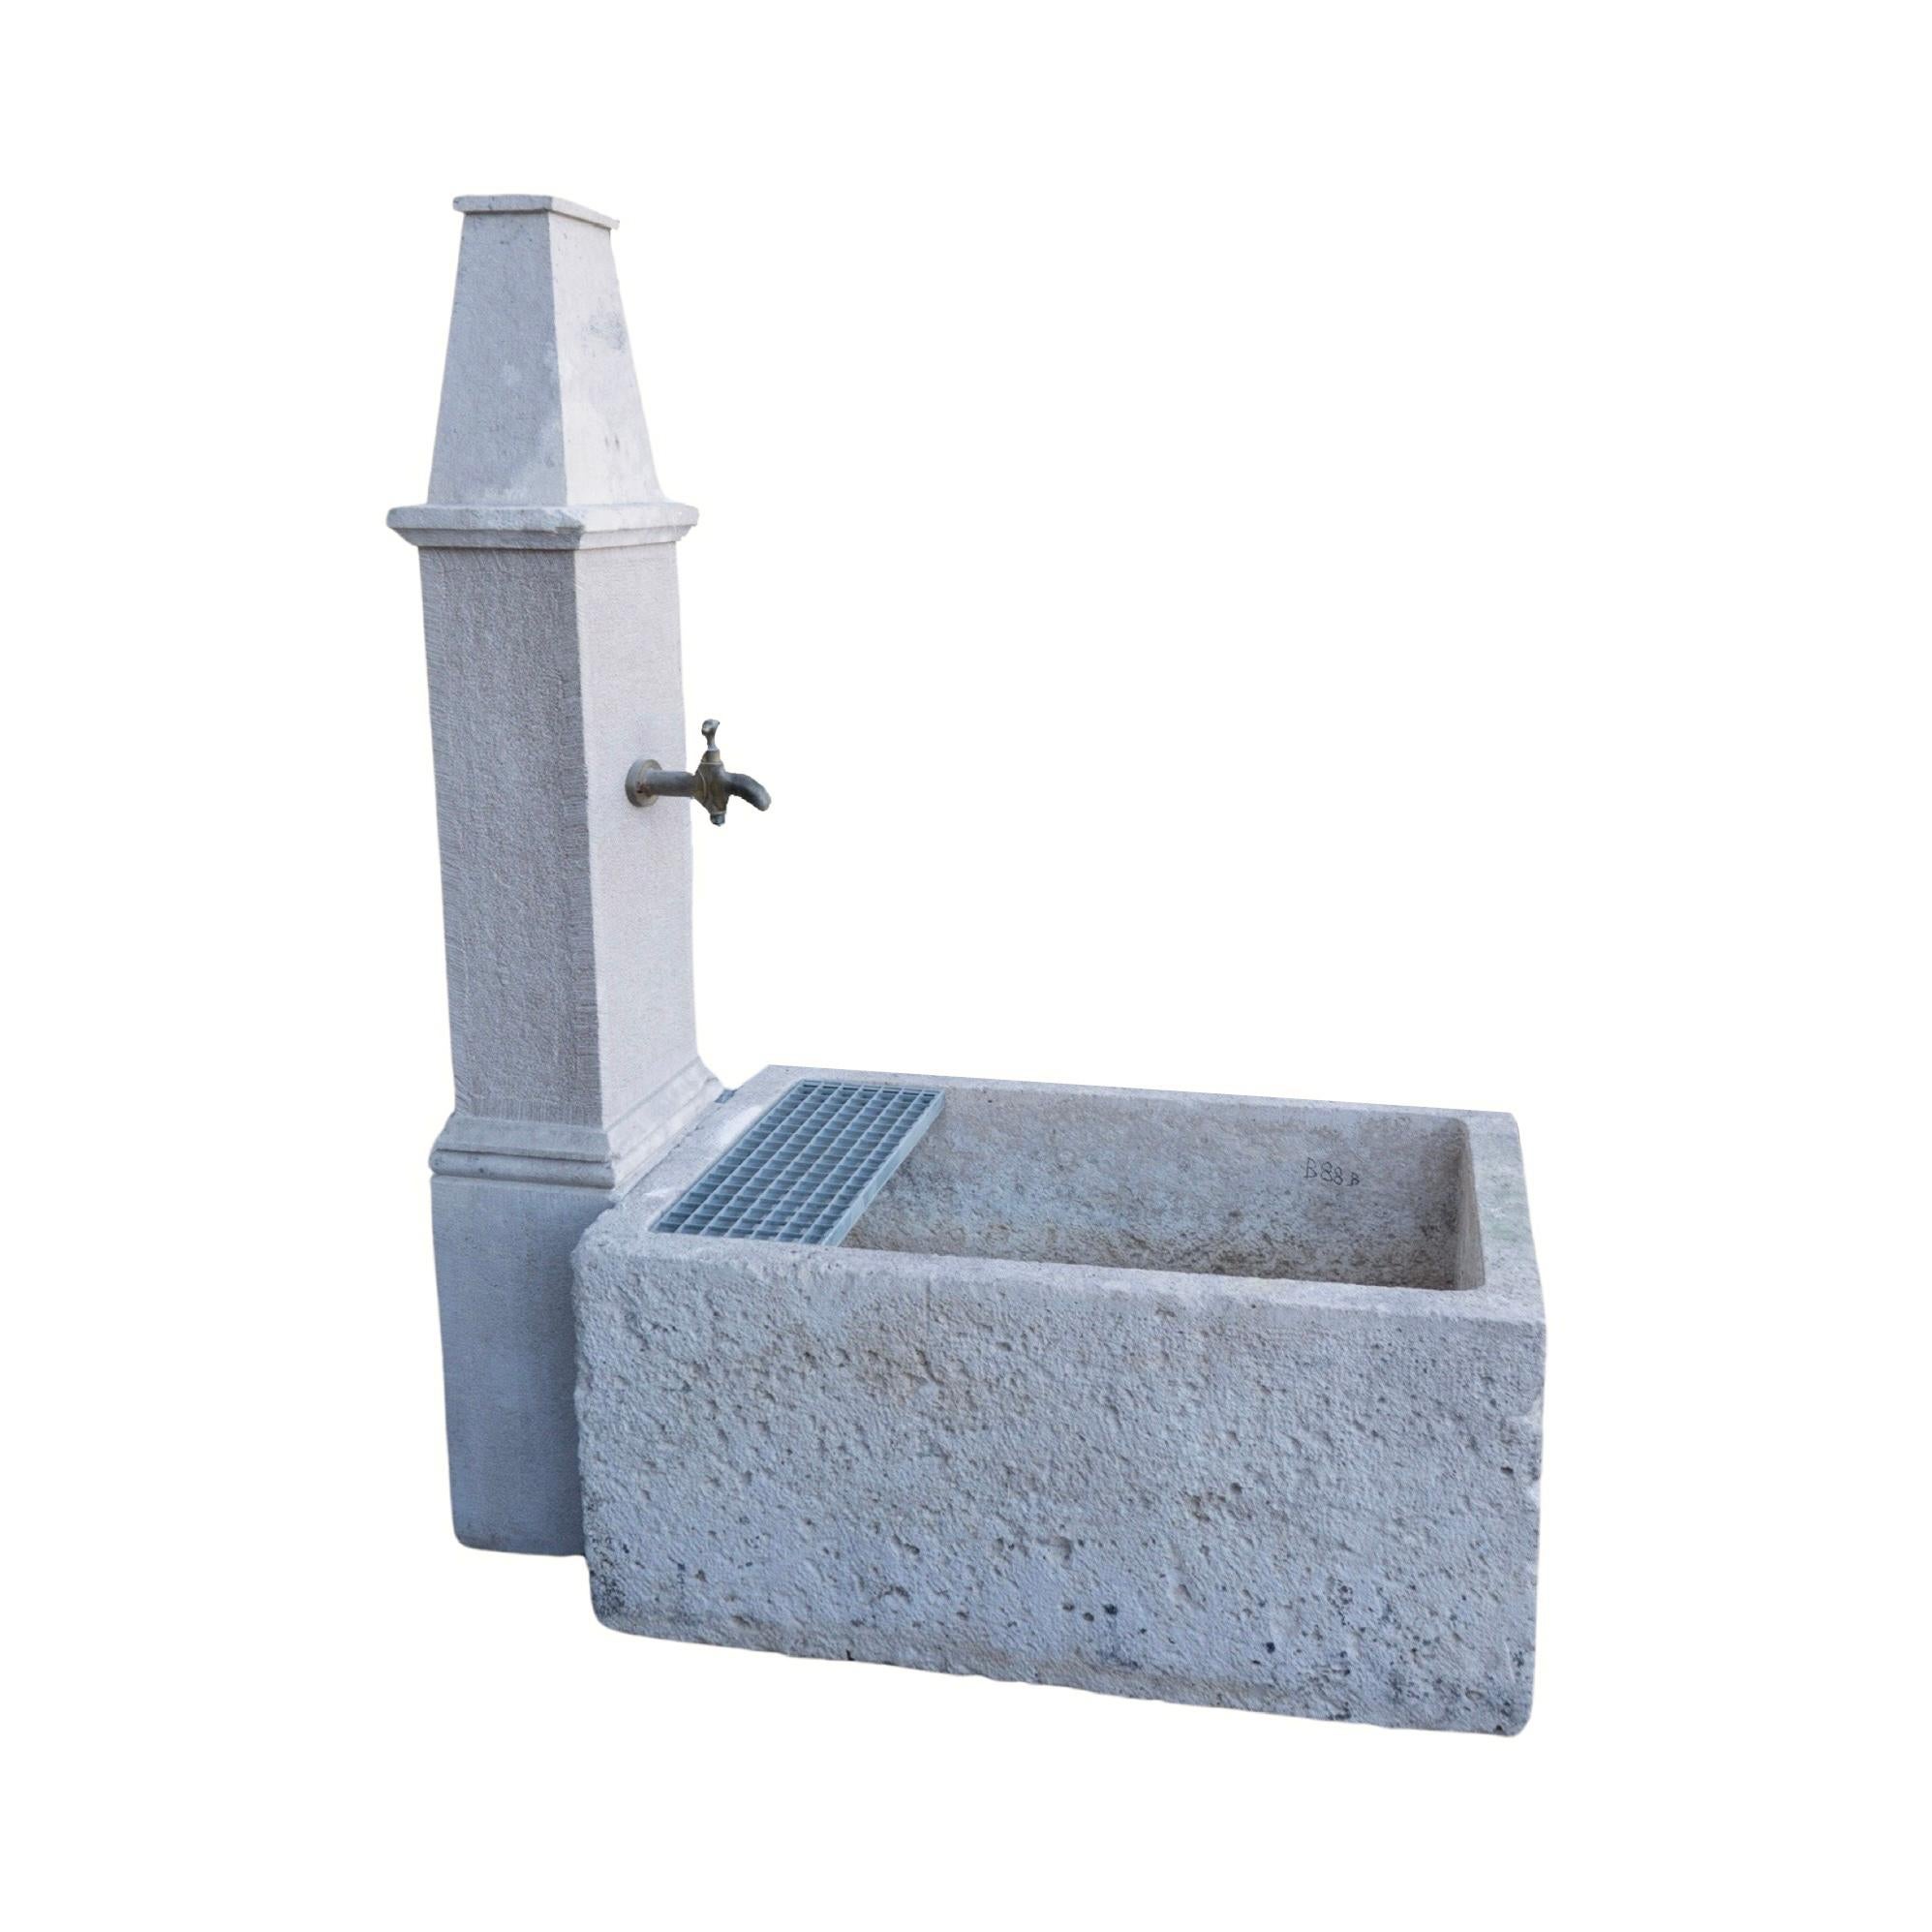 Handcarved in the South of France, this 1880s French Burgundy Limestone Wall Fountain brings elegance to any outdoor space. The trough style basin and antique bronze spout provide a classic touch, while the water bucket ledge allows for easy